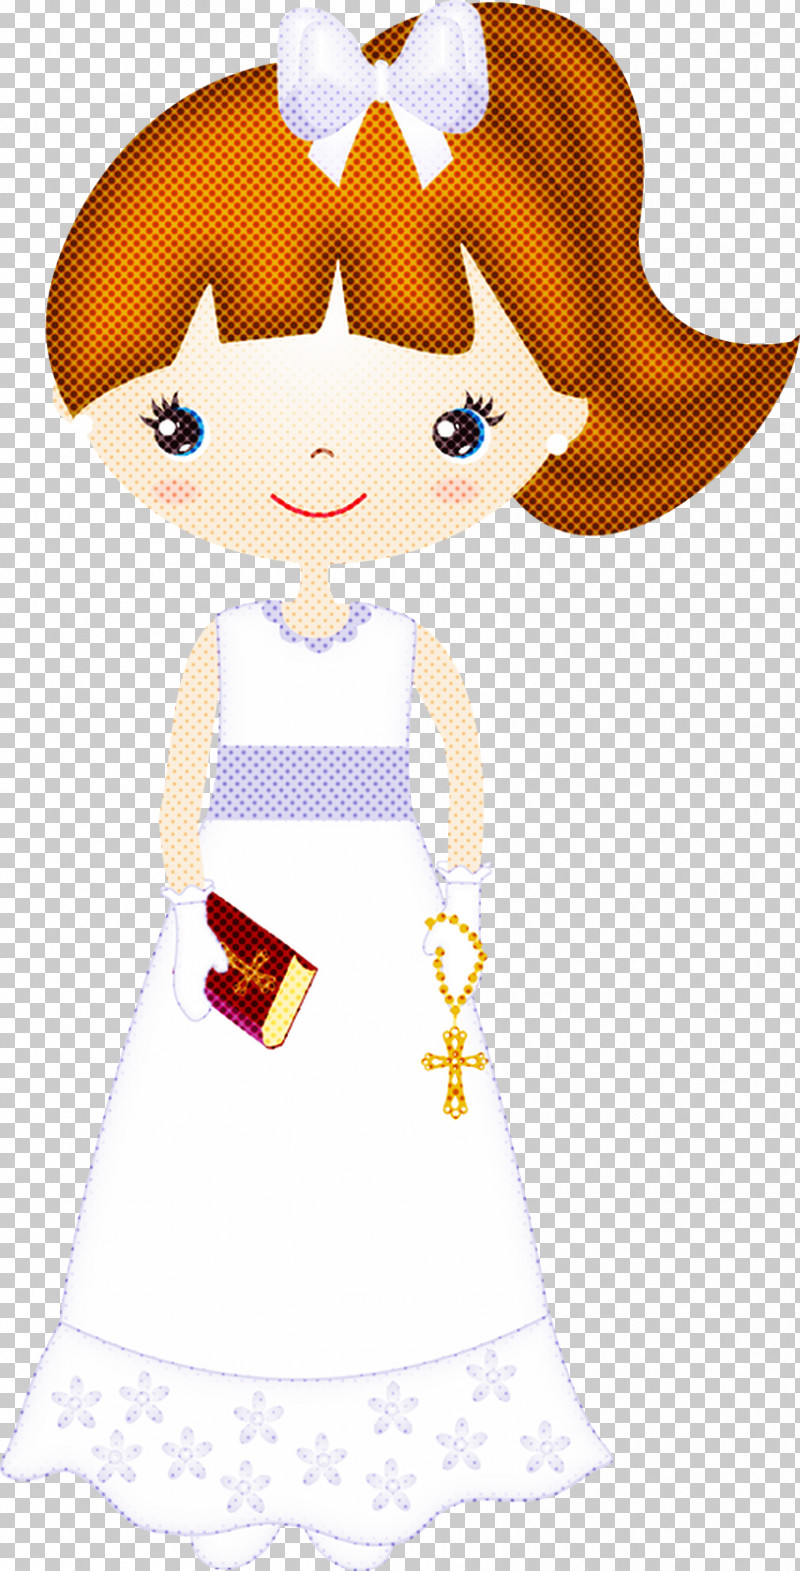 Cartoon Angel Style PNG, Clipart, Angel, Cartoon, Style Free PNG Download